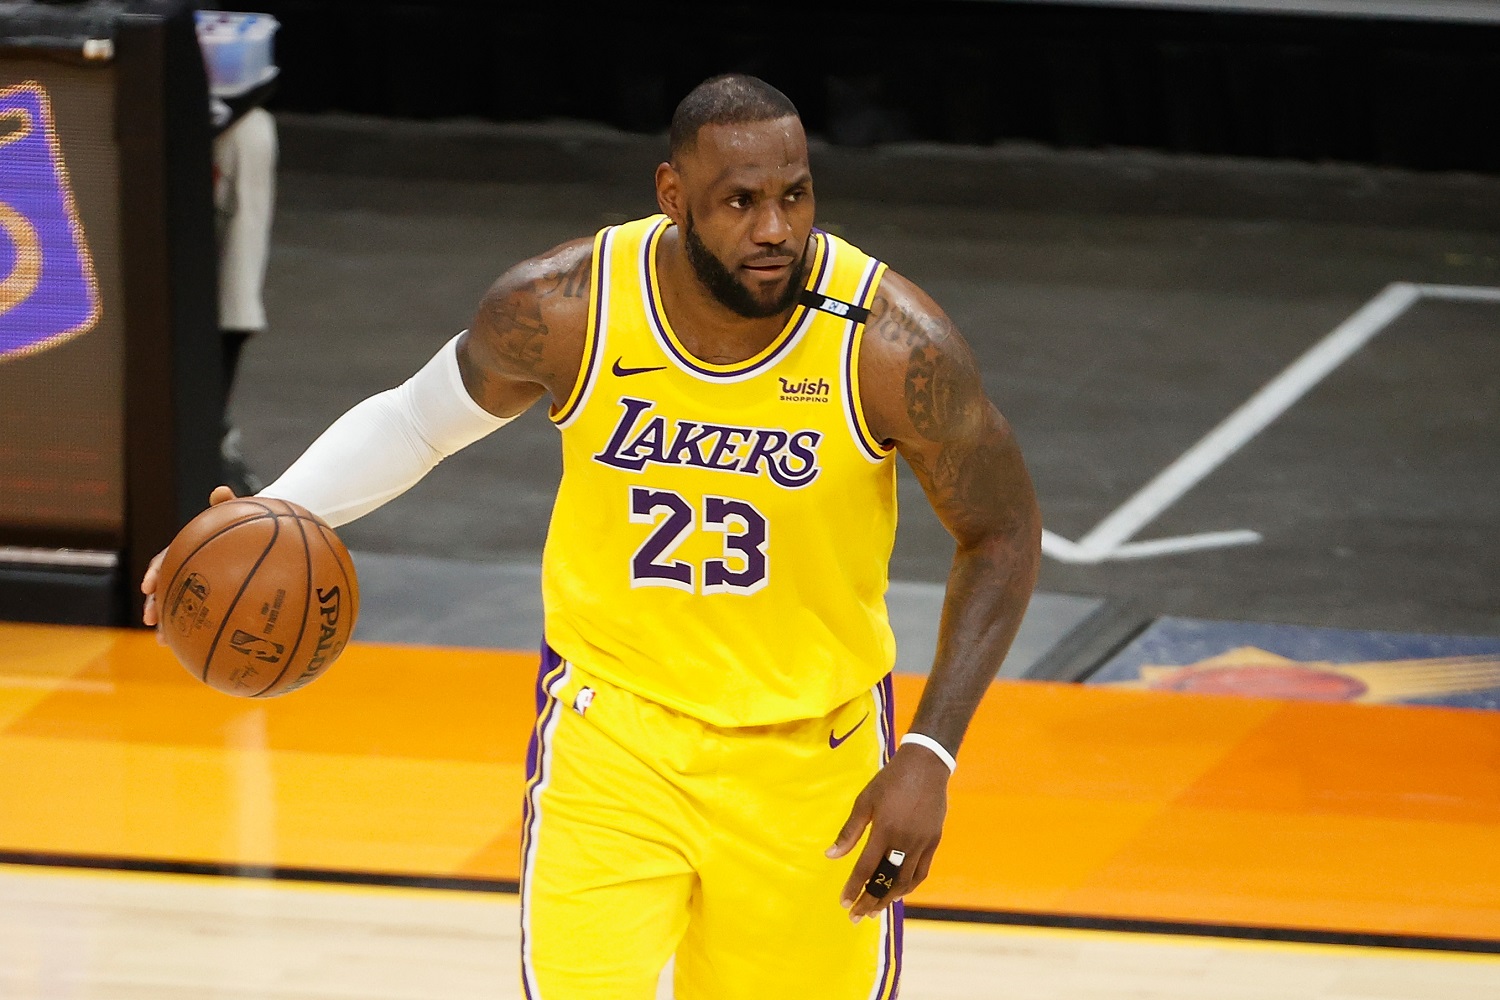 LeBron James of the Los Angeles Lakers handles the ball in Game 5 of the NBA Western Conference quarterfinals vs. the Phoenix Suns.